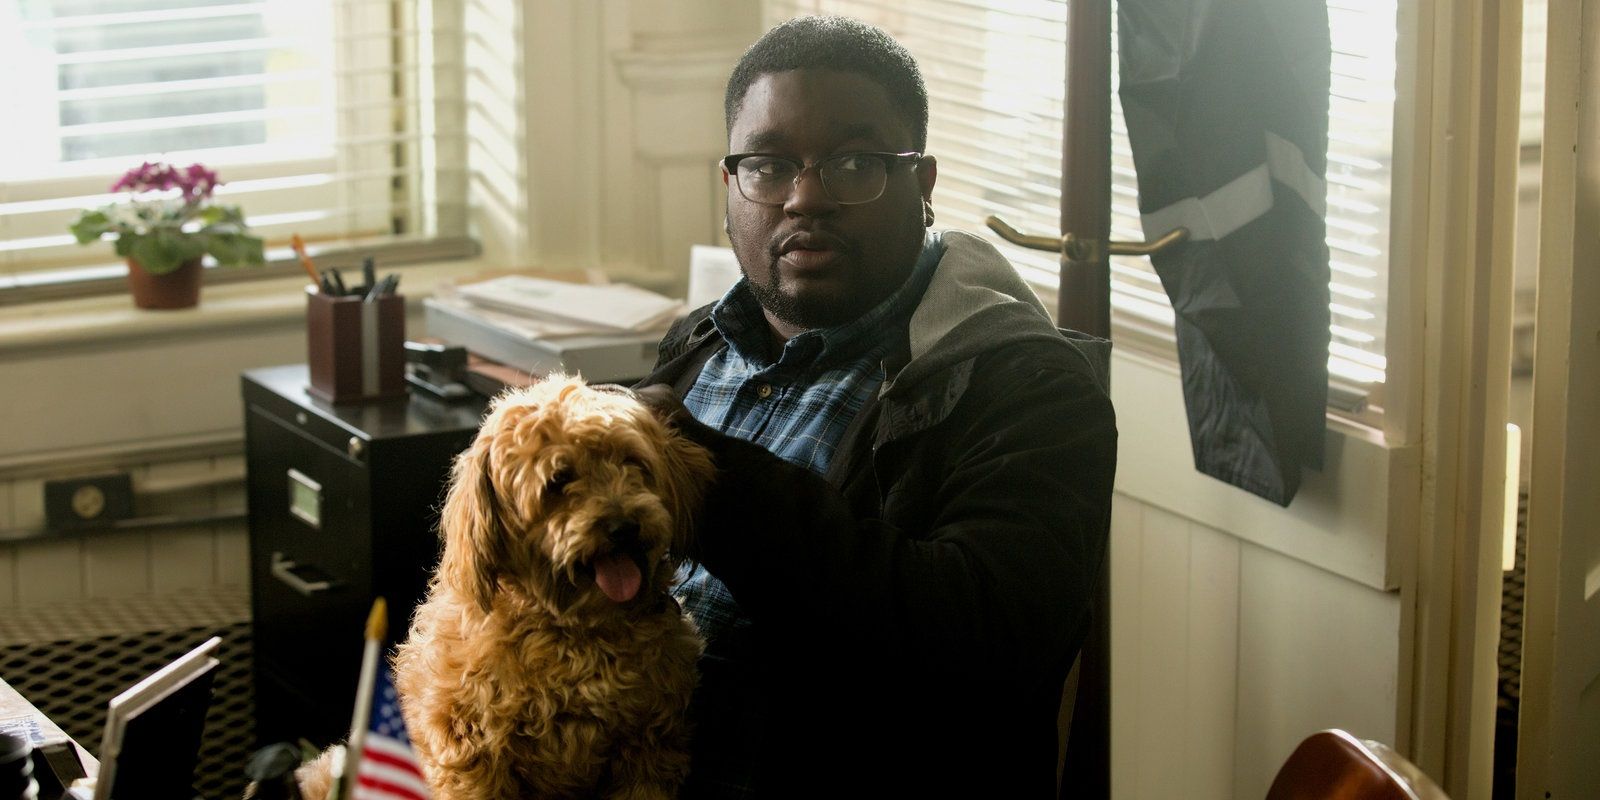 Lil Rel Howery as Rod holding a dog in Get Out.